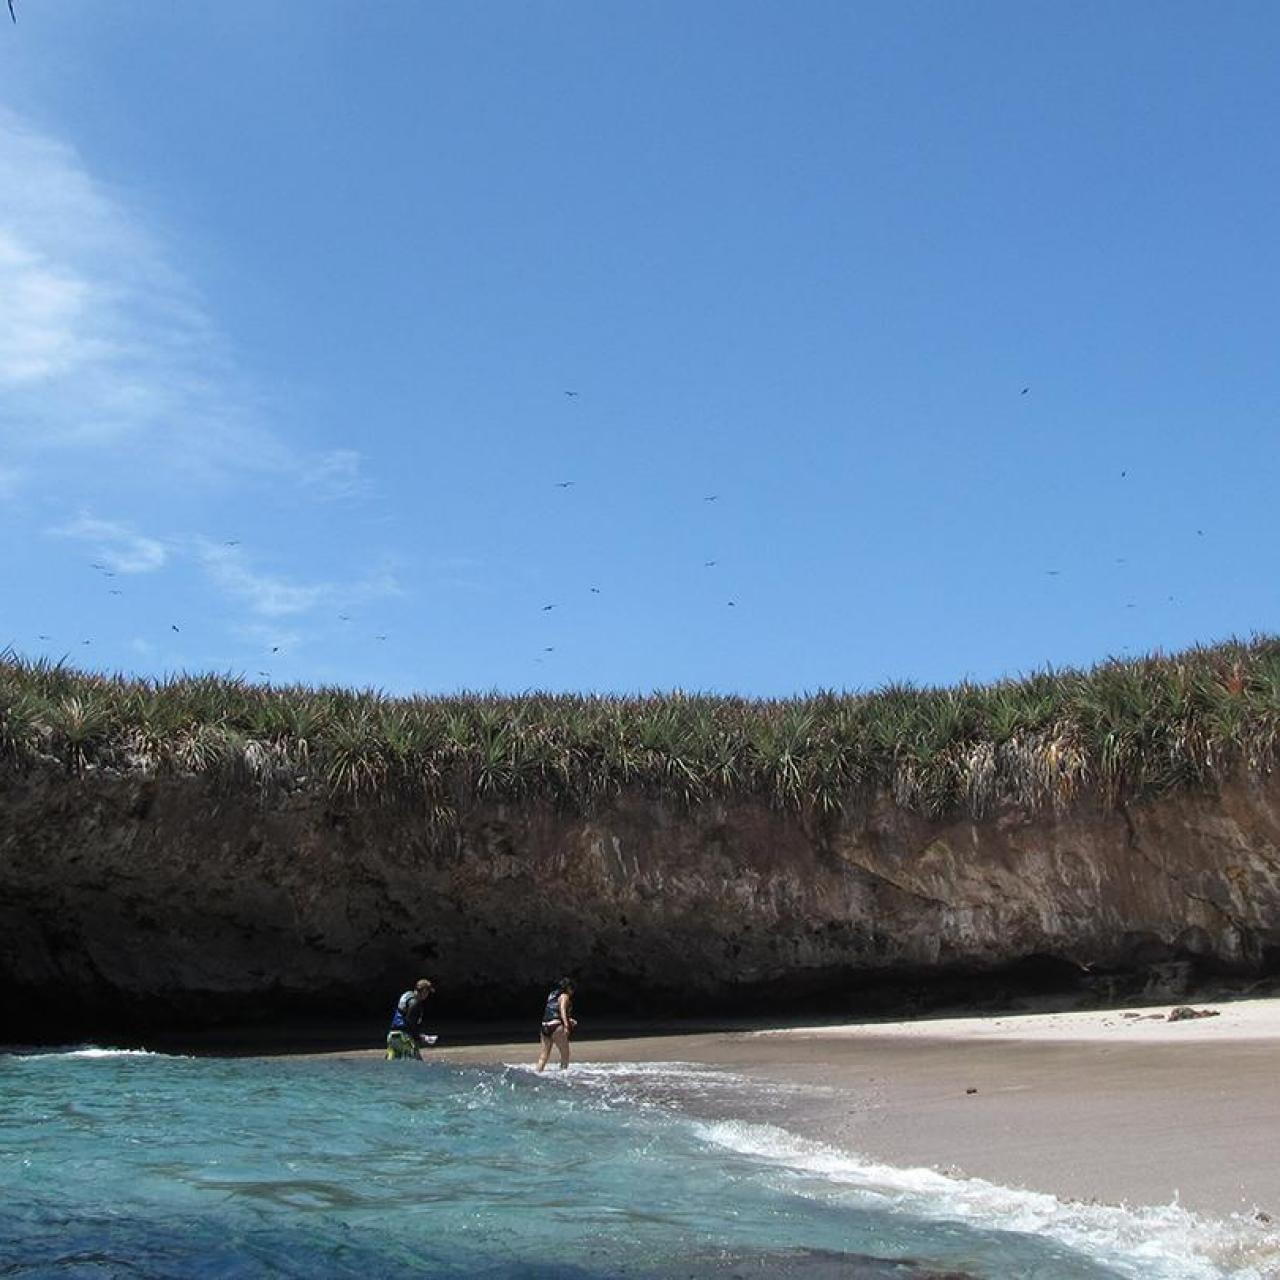 Theres A Hidden Beach In Mexico Called Playa del Amor Travel and Exploration Discovery pic